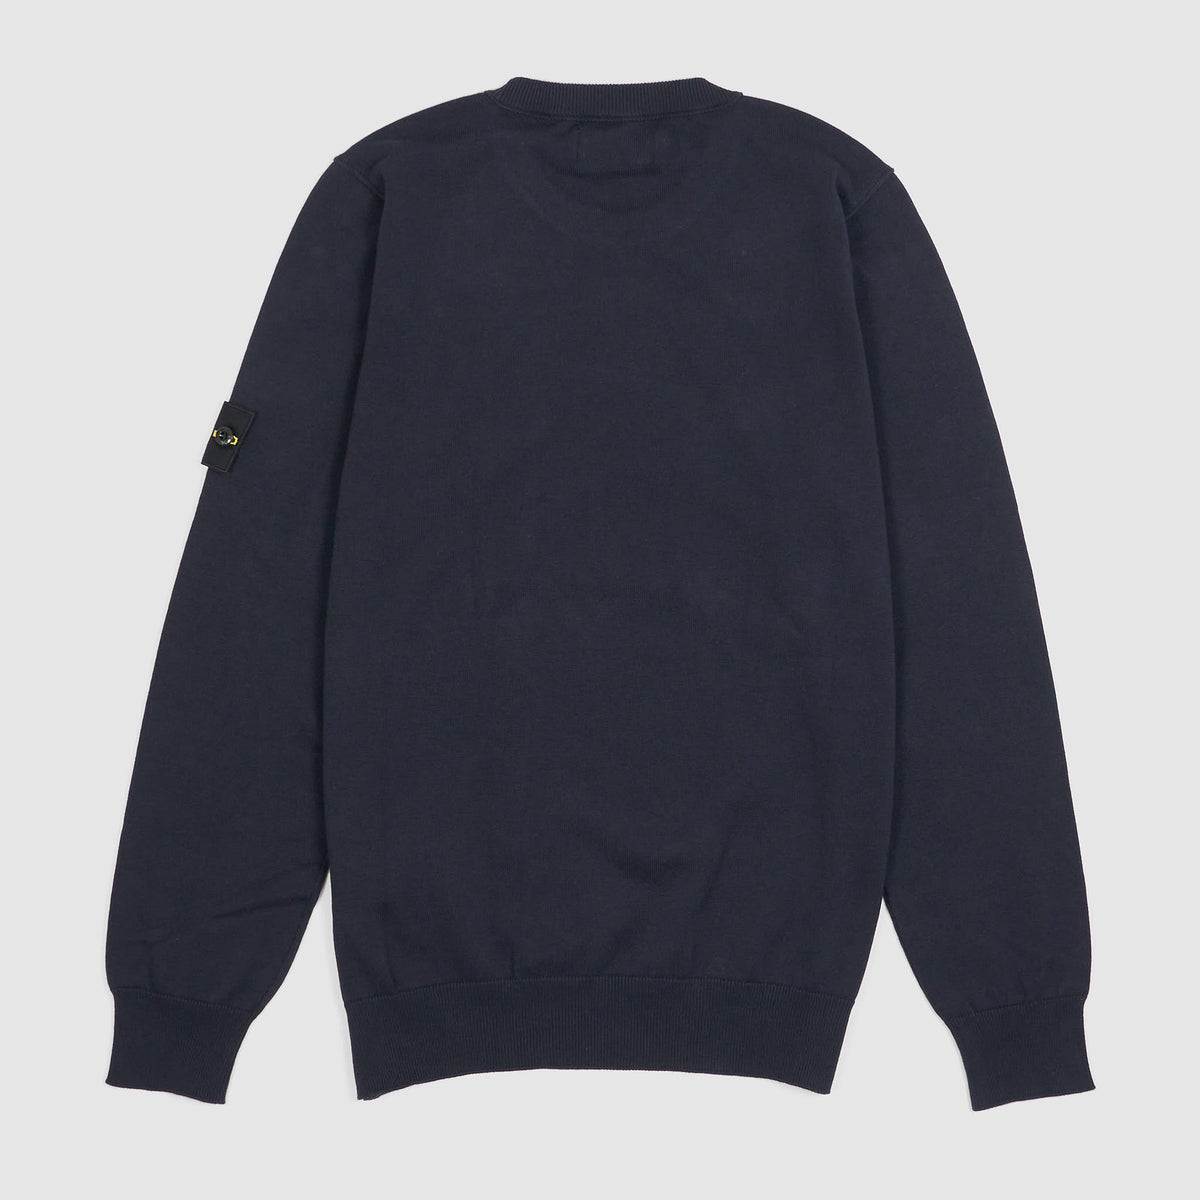 Stone Island Crew Neck Knitted Cotton Pullover